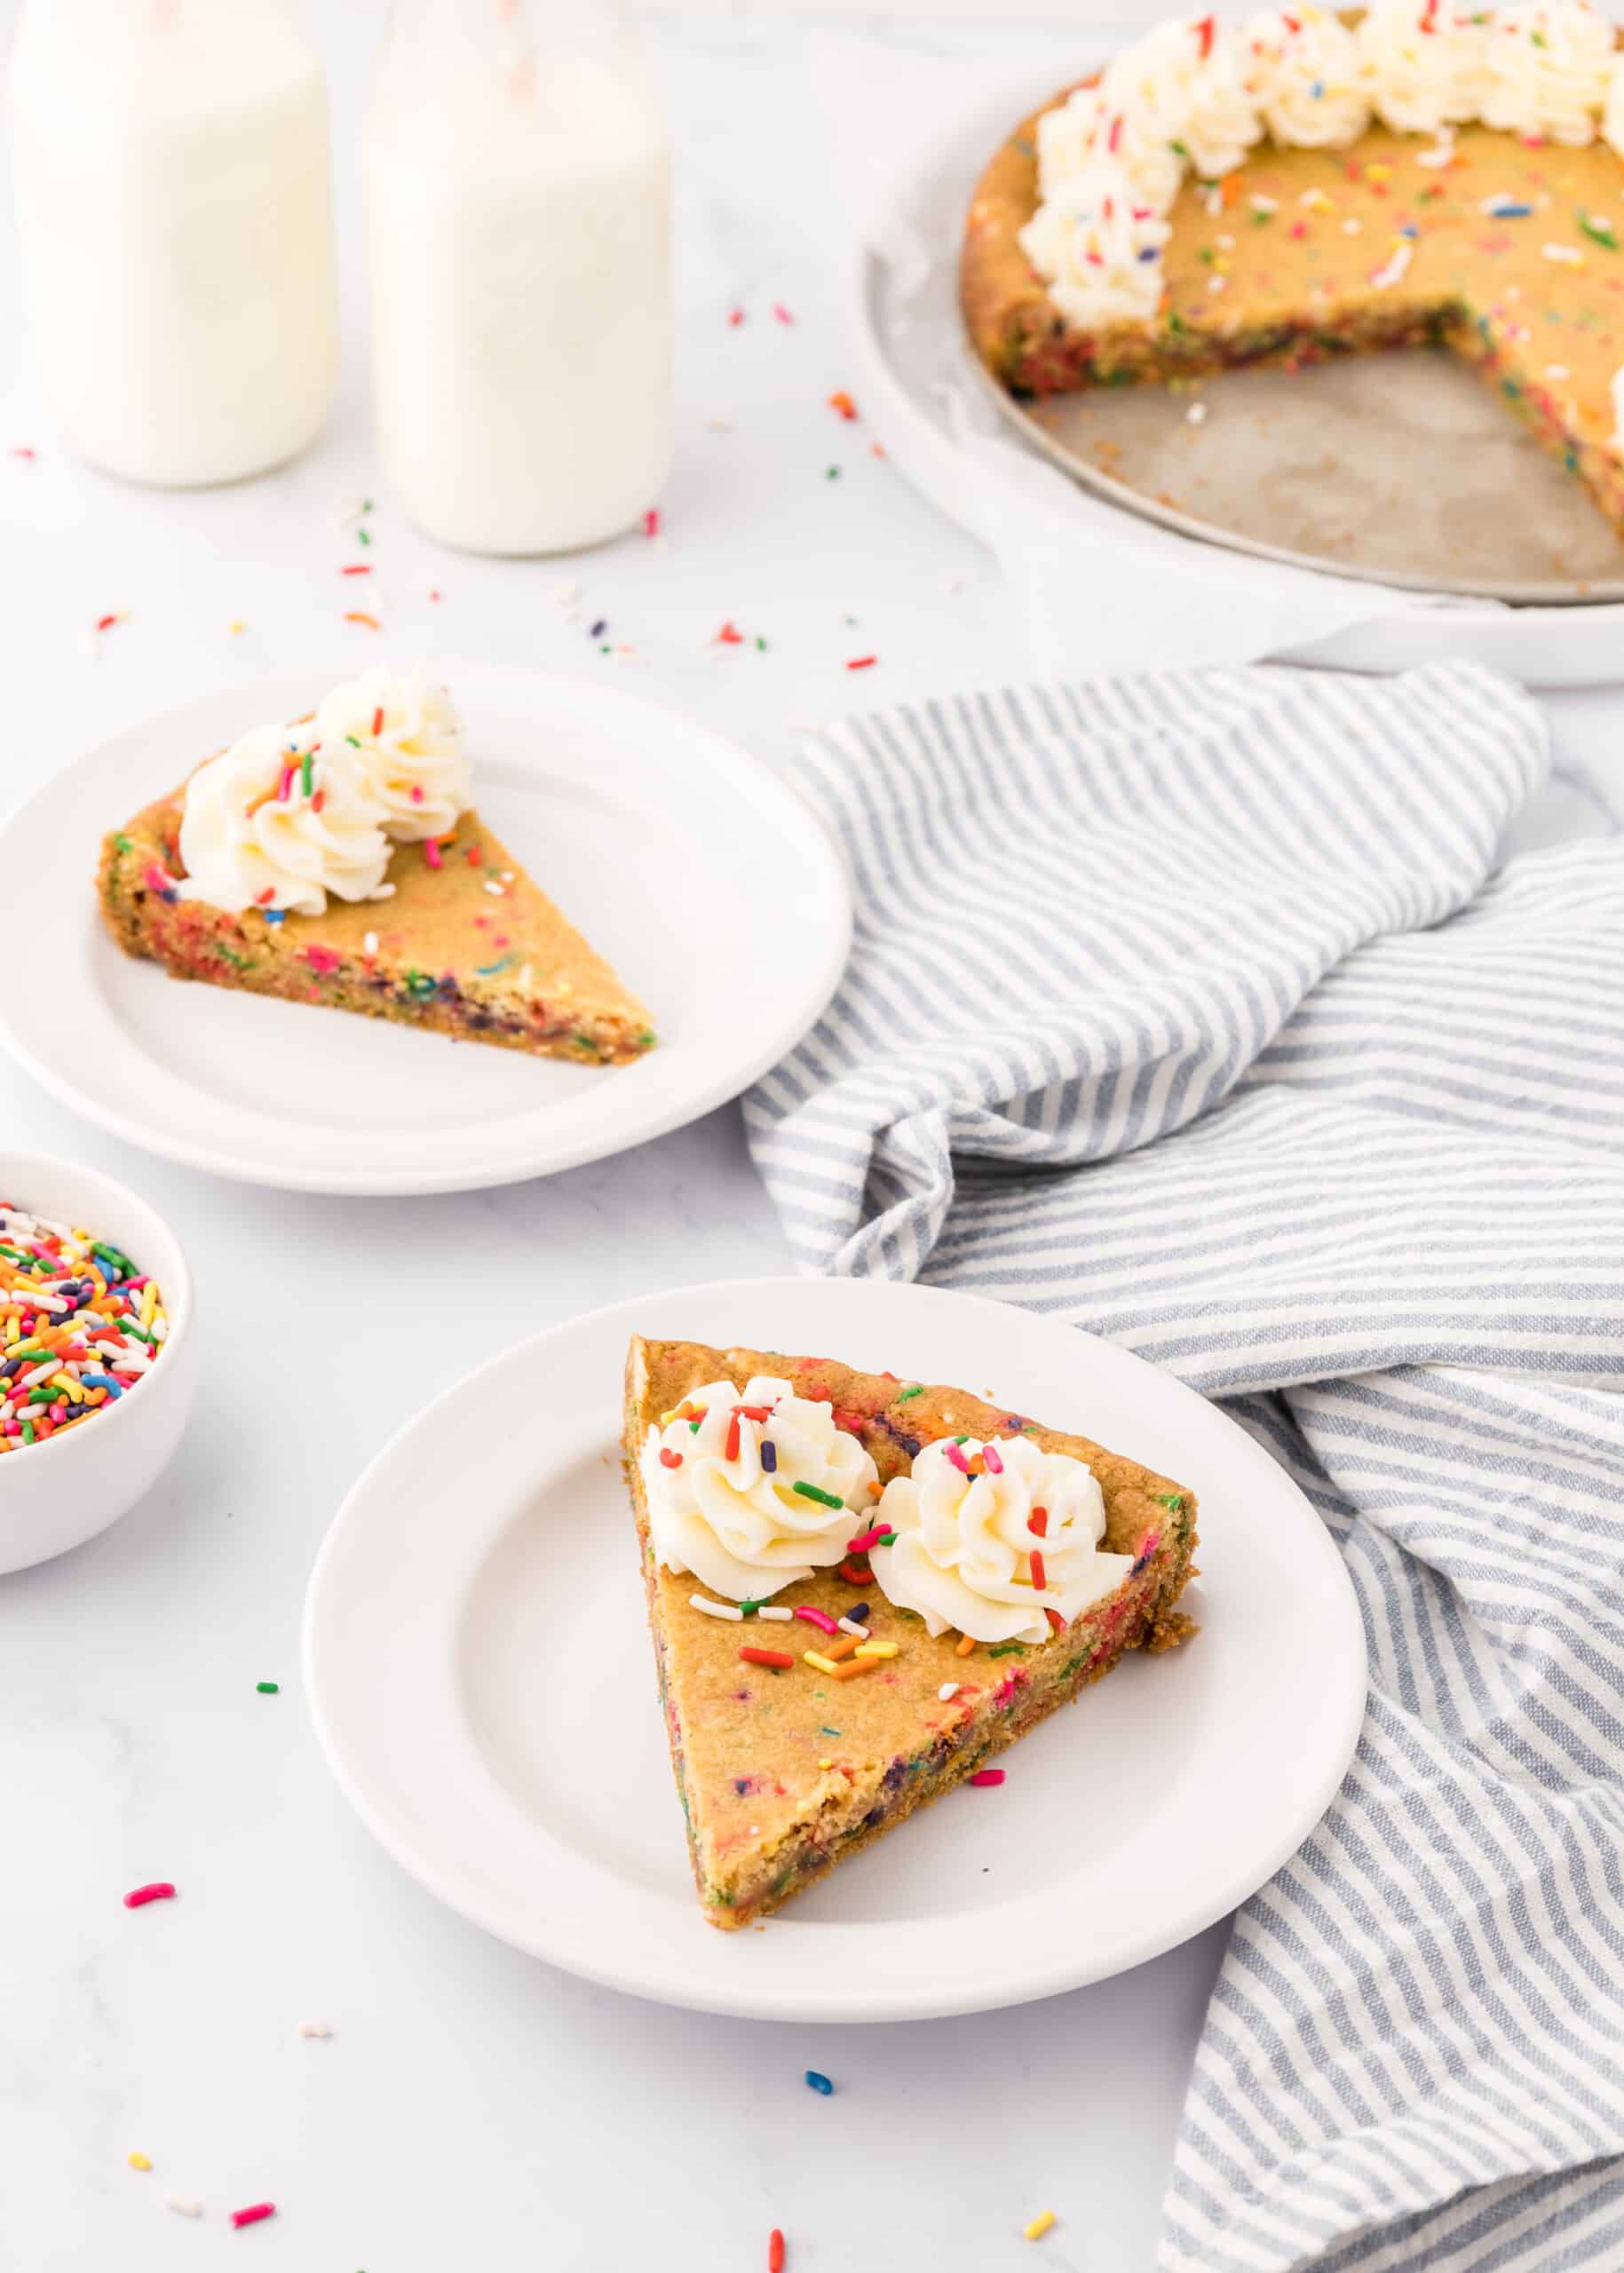 How to make Funfetti Cookie Cake